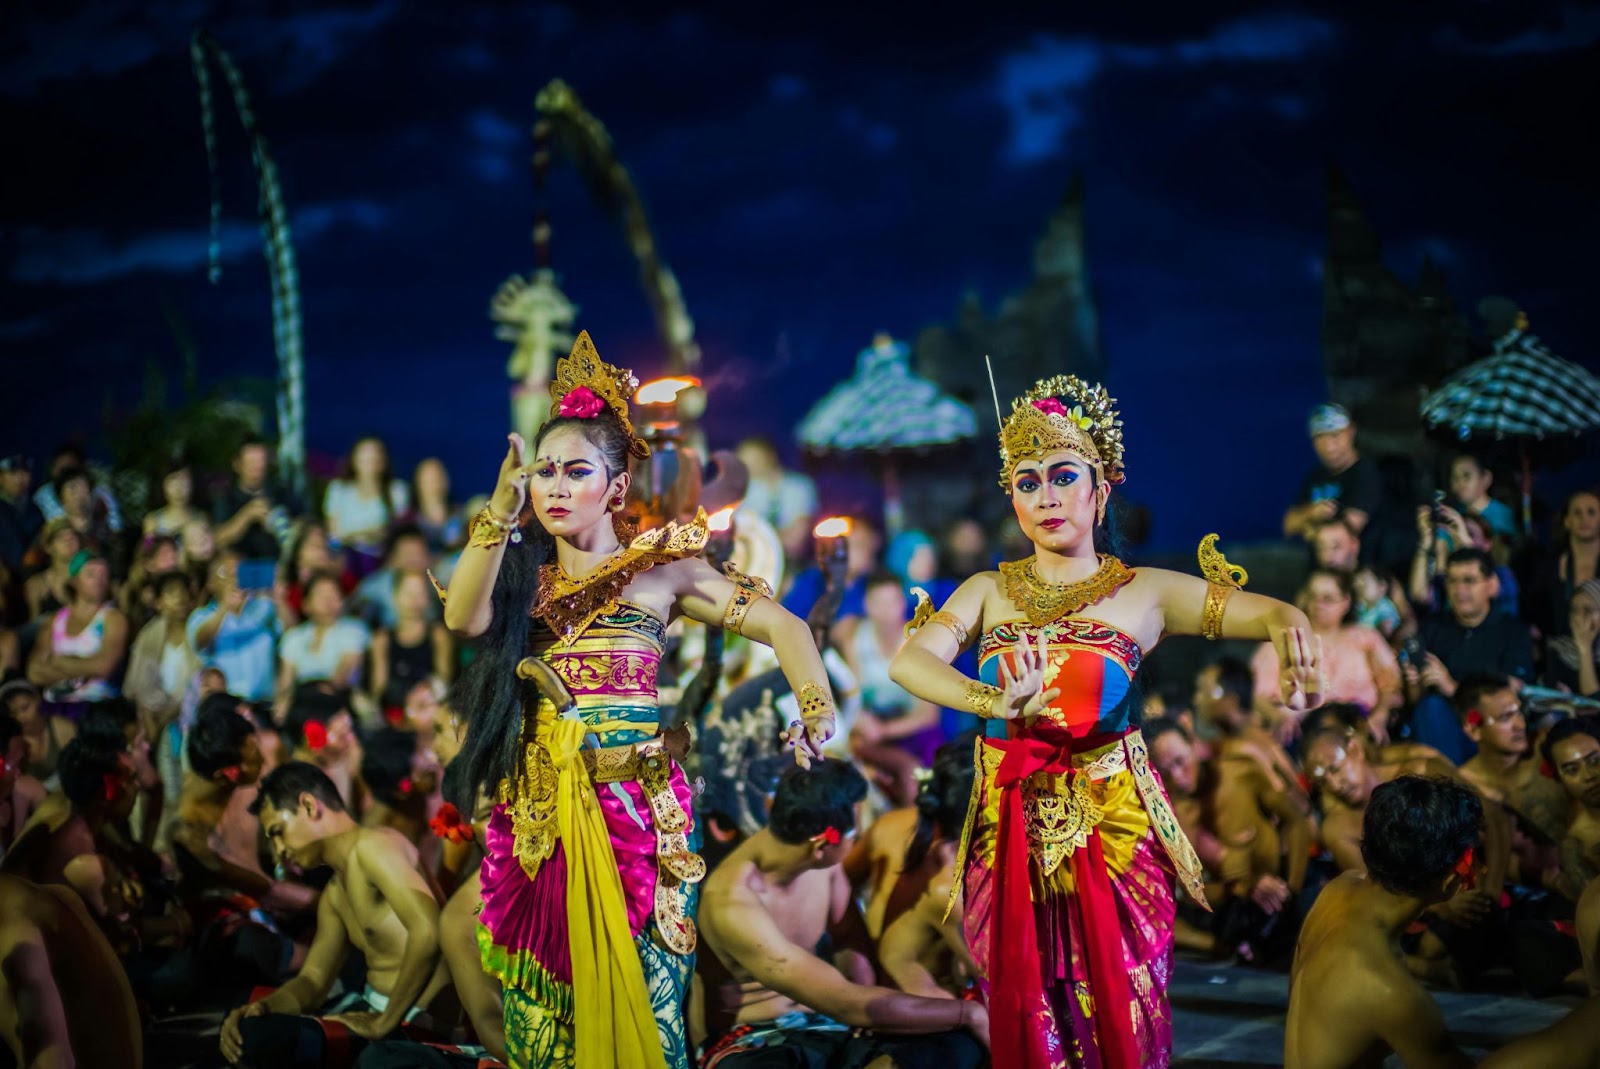 two indonesian women wearing traditional bali outfit dancing in the night among the crowds